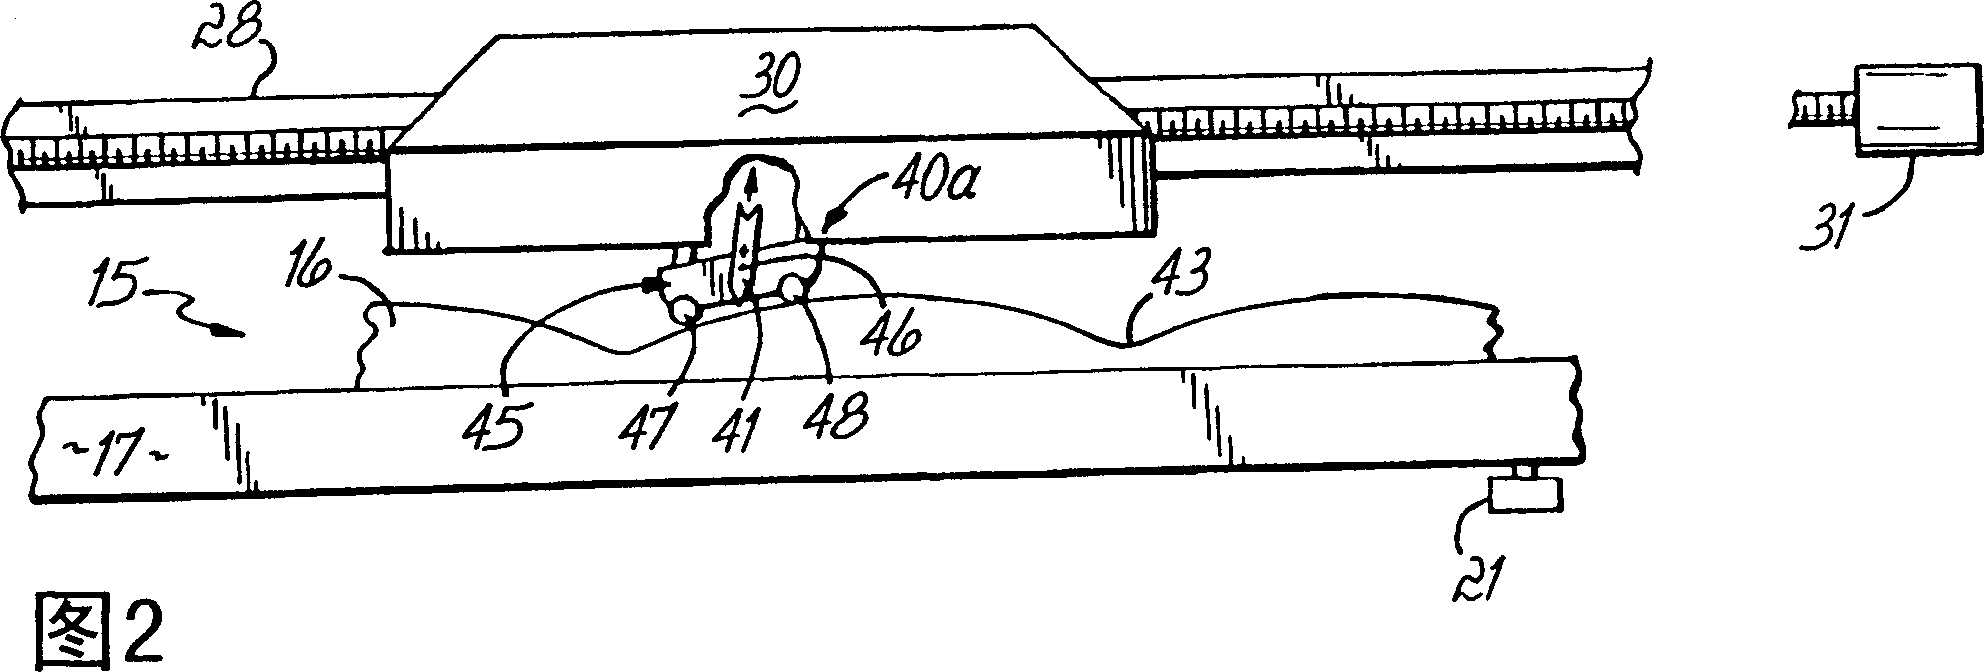 Method and apparatus for printing on rigid panels and other contoured or textured surfaces